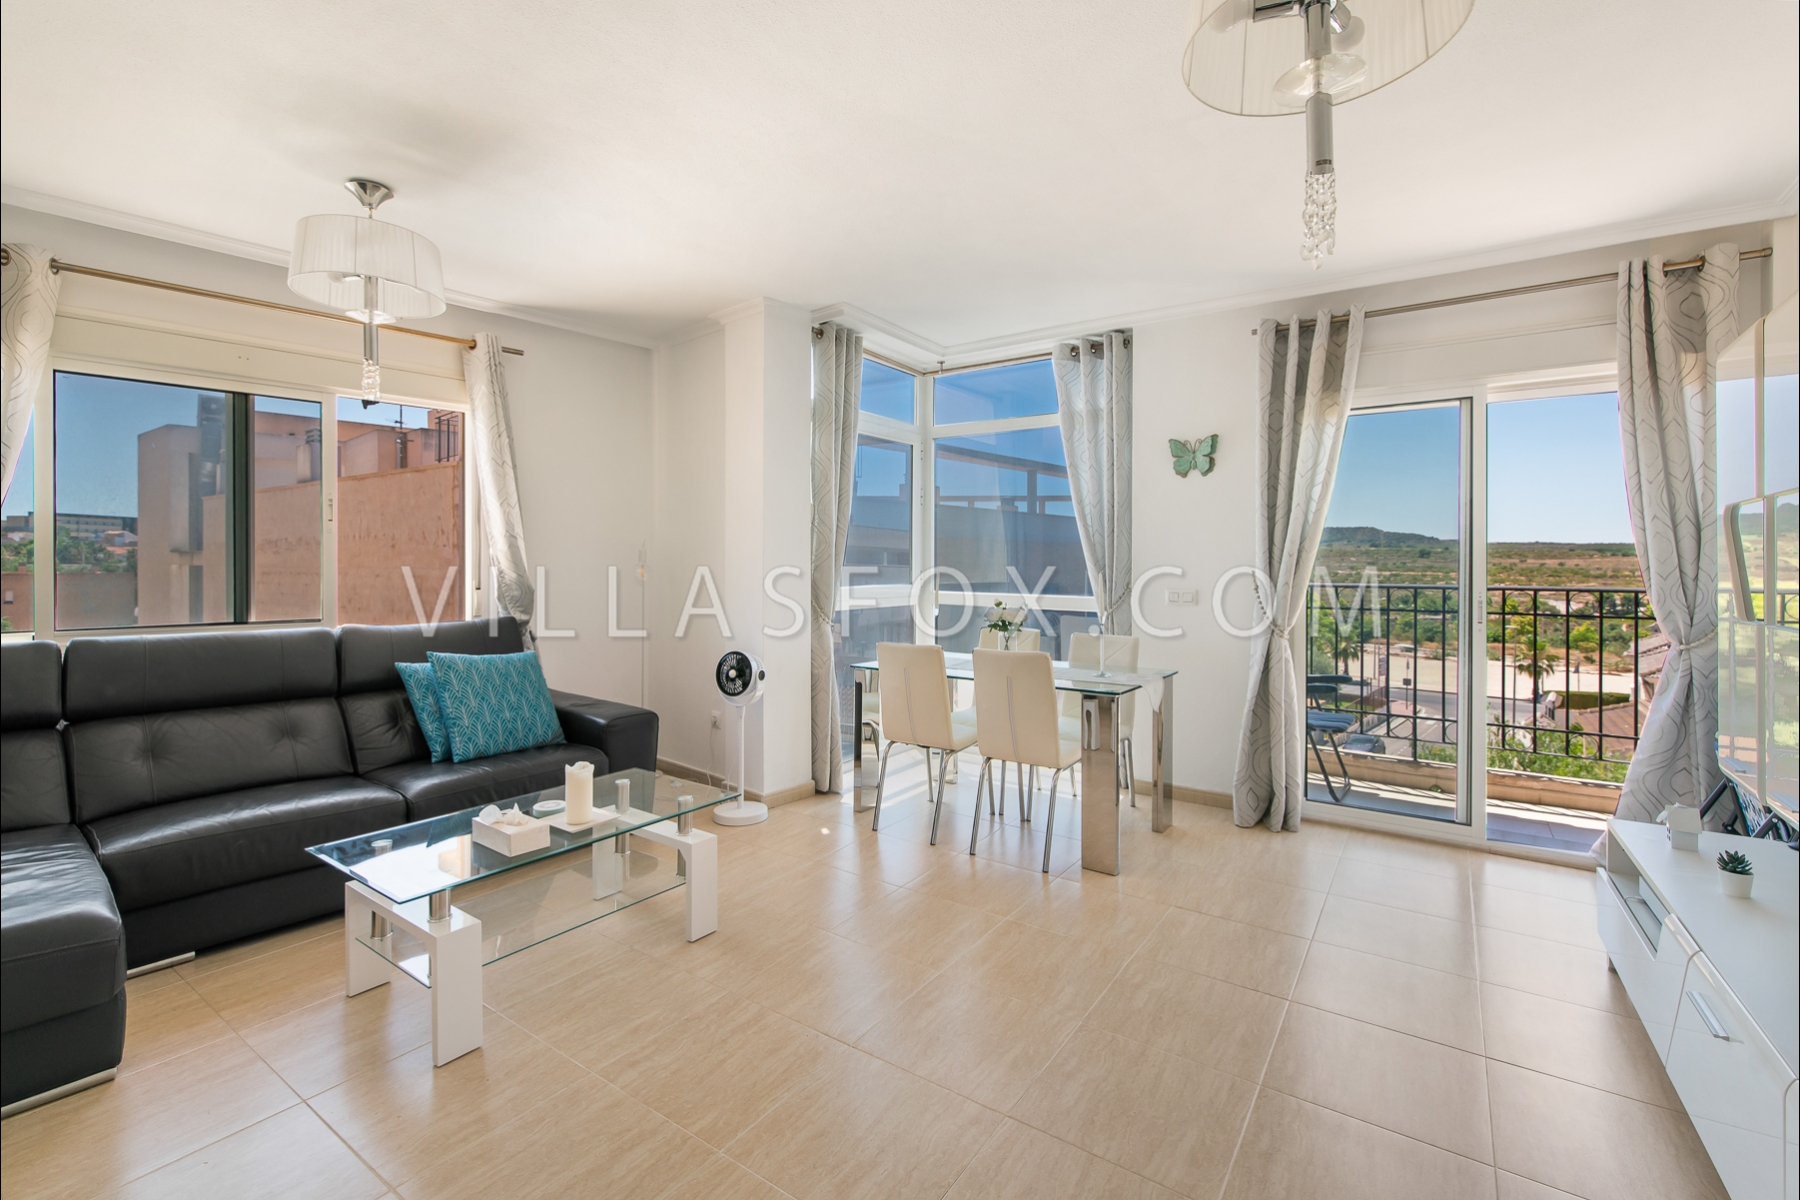 Top-floor, 2-bedroom south-facing apartment with lift and private solarium